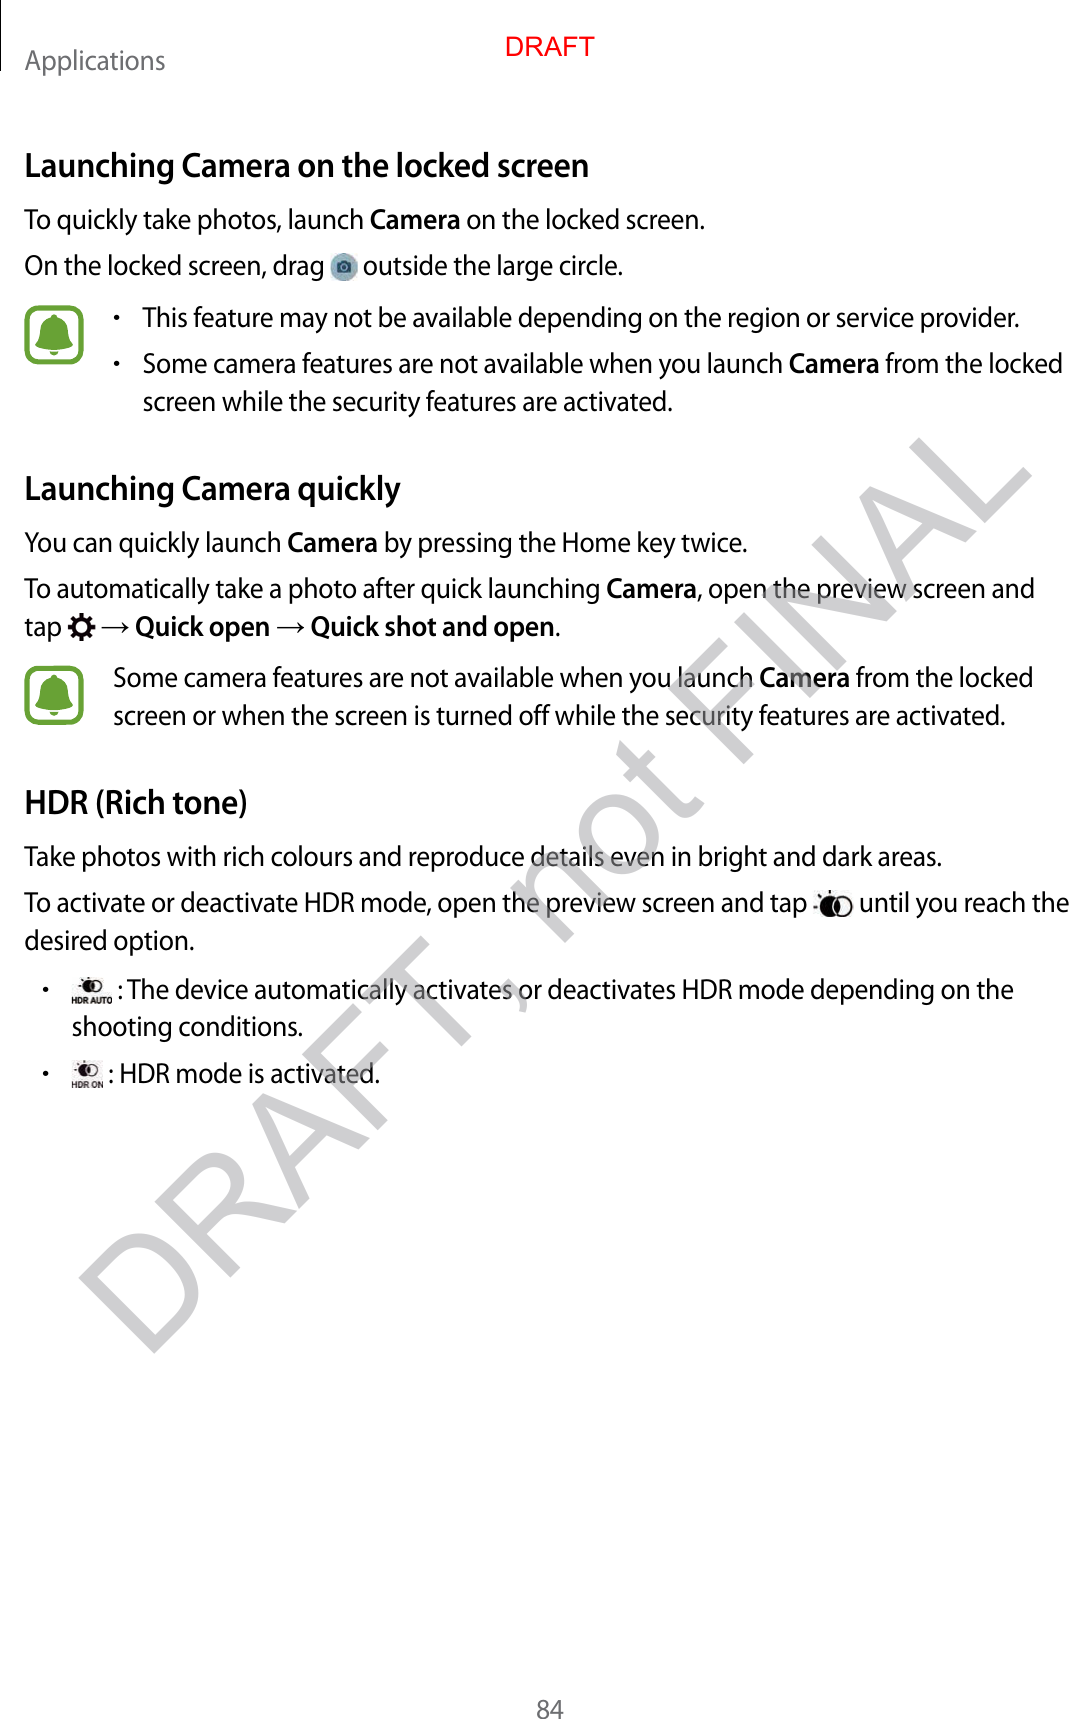 Applications84Launching Camera on the locked screenTo quickly take photos, launch Camera on the locked screen.On the locked screen, drag   outside the large circle.•This feature may not be available depending on the region or service provider.•Some camera features are not available when you launch Camera from the locked screen while the security features are activated.Launching Camera quicklyYou can quickly launch Camera by pressing the Home key twice.To automatically take a photo after quick launching Camera, open the preview screen and tap    Quick open  Quick shot and open.Some camera features are not available when you launch Camera from the locked screen or when the screen is turned off while the security features are activated.HDR (Rich tone)Take photos with rich colours and reproduce details even in bright and dark areas.To activate or deactivate HDR mode, open the preview screen and tap   until you reach the desired option.• : The device automatically activates or deactivates HDR mode depending on the shooting conditions.• : HDR mode is activated.DRAFTDRAFT, not FINAL